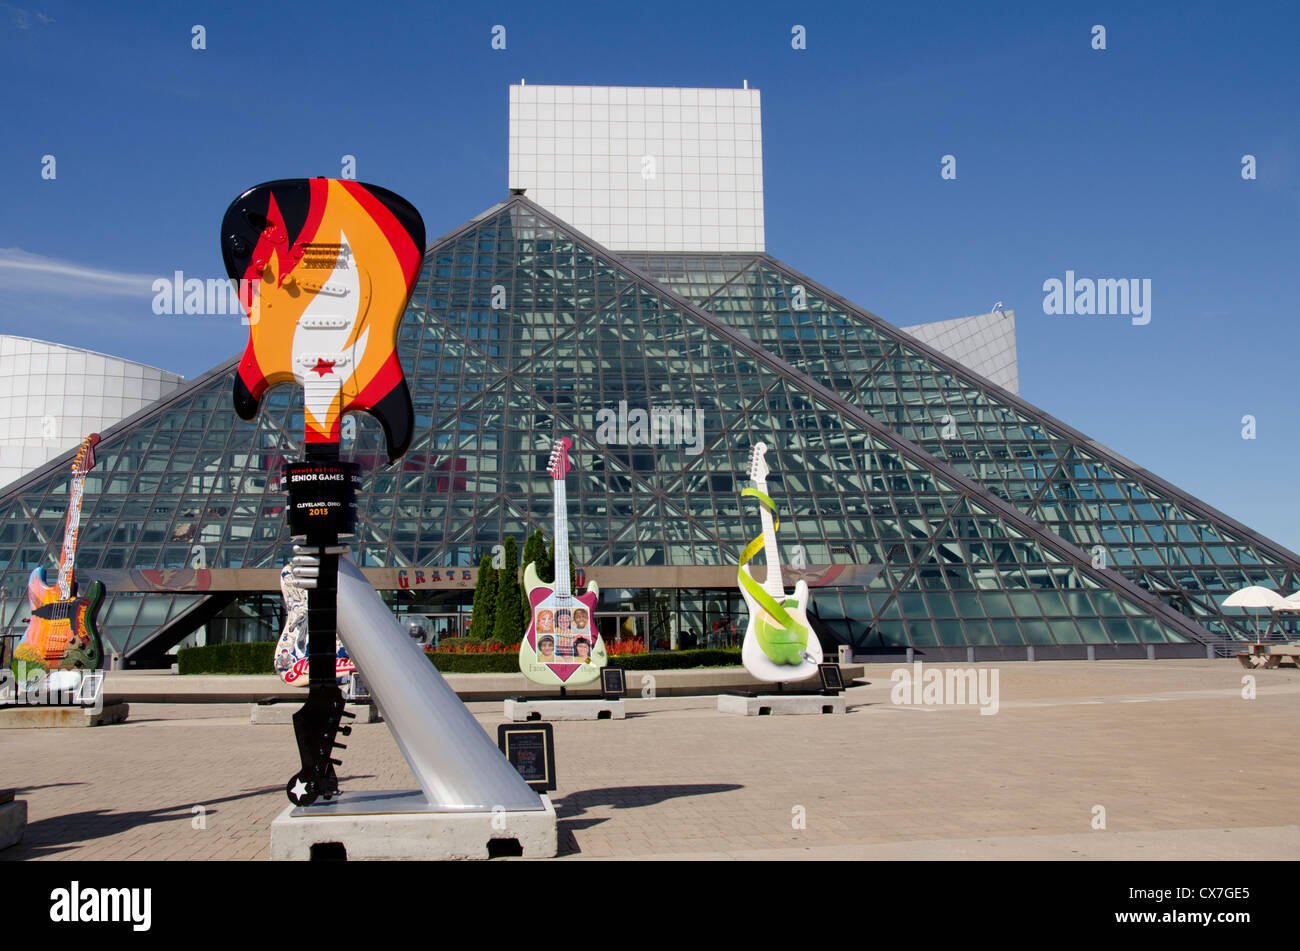 Ohio-Cleveland-Rock-and-Roll-Hall-of-Fam